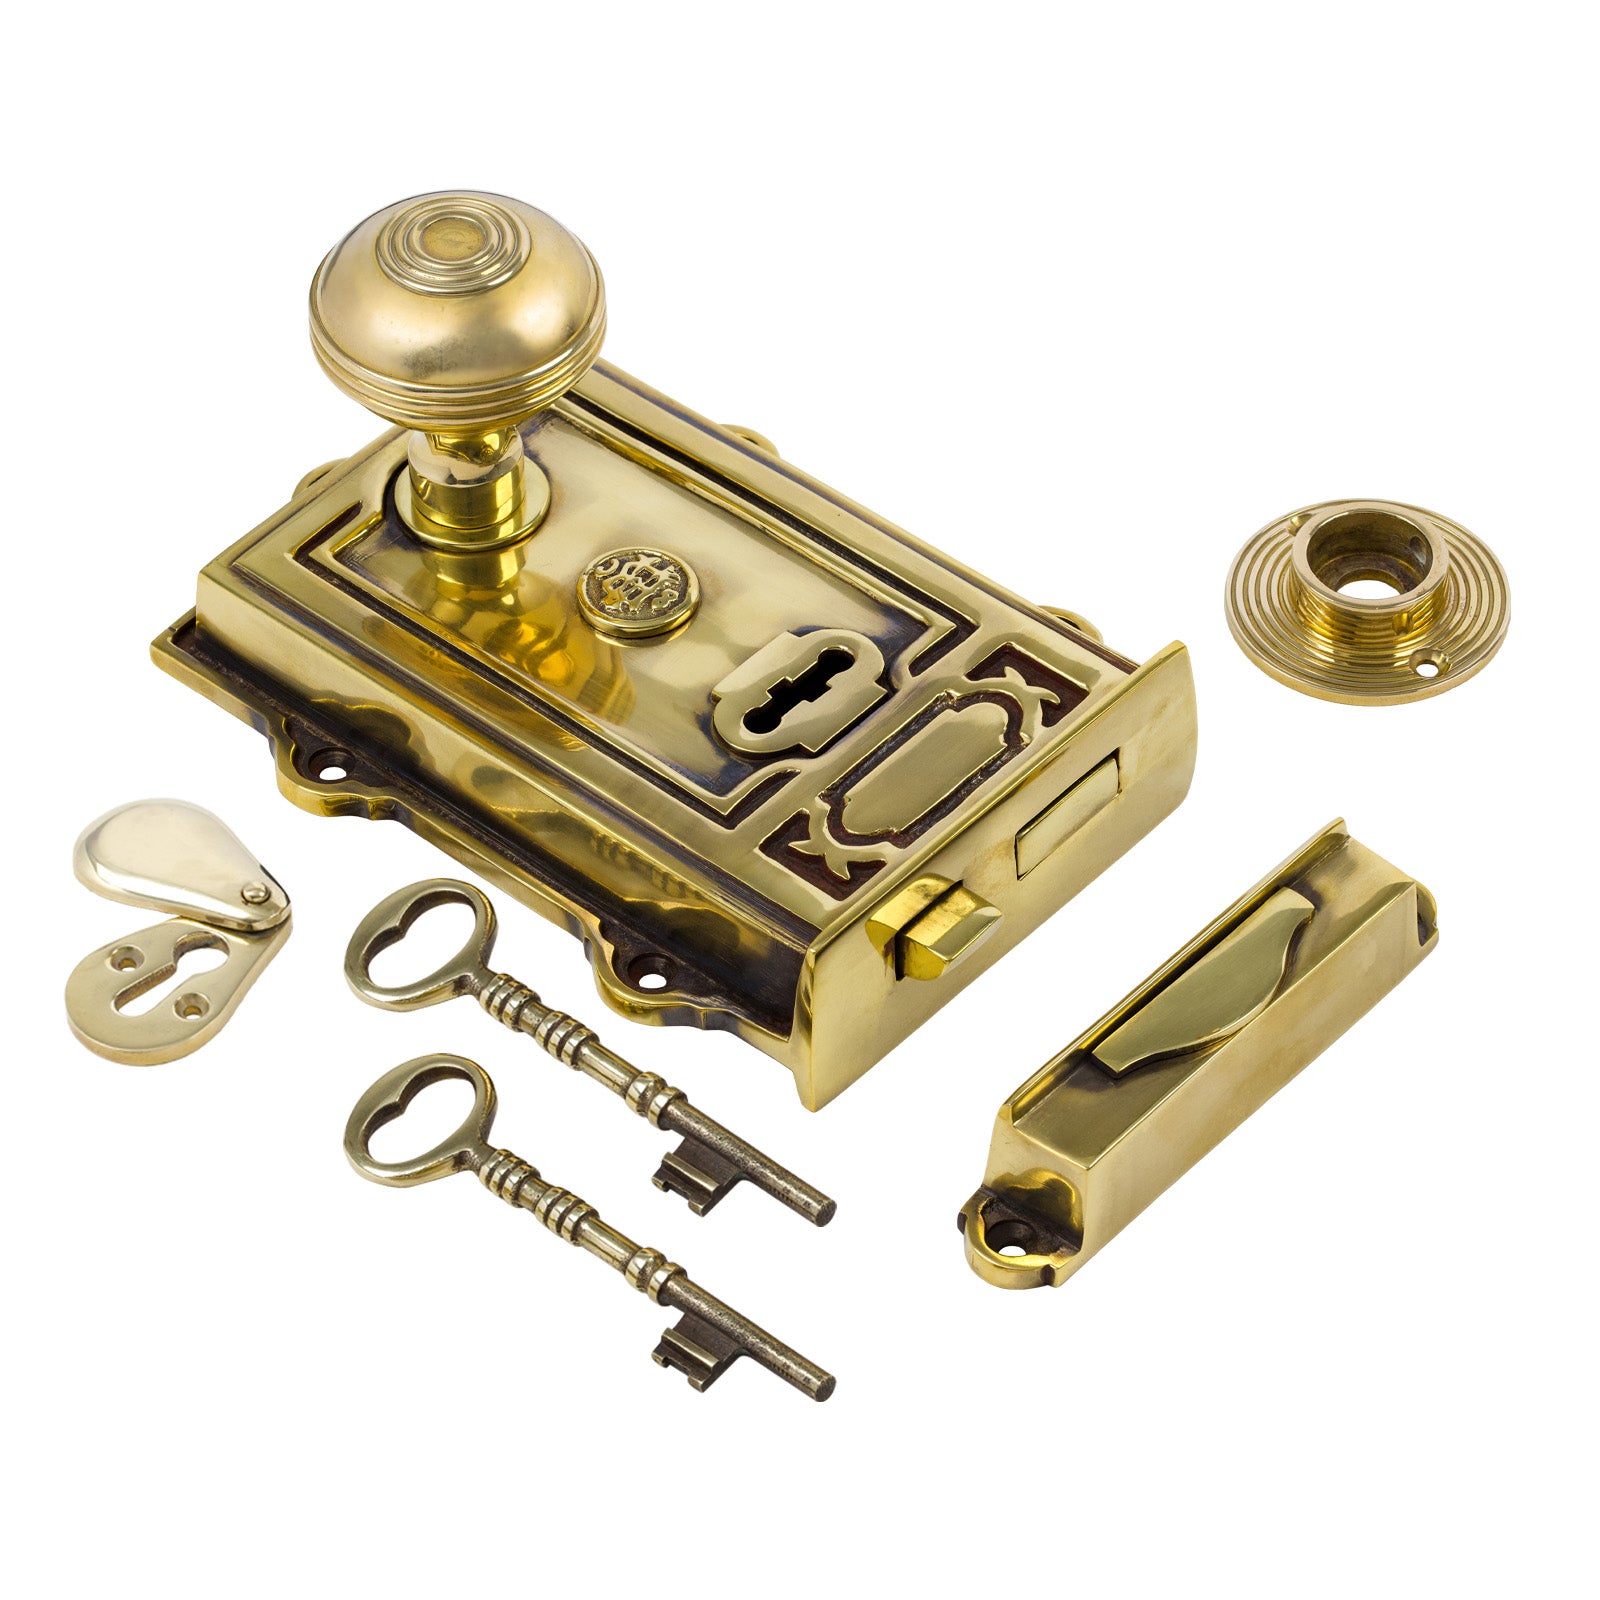 SHOW Image of Ornate Antique Brass Rim Lock with Brass Ringed Door Knob Set - Polished Brass